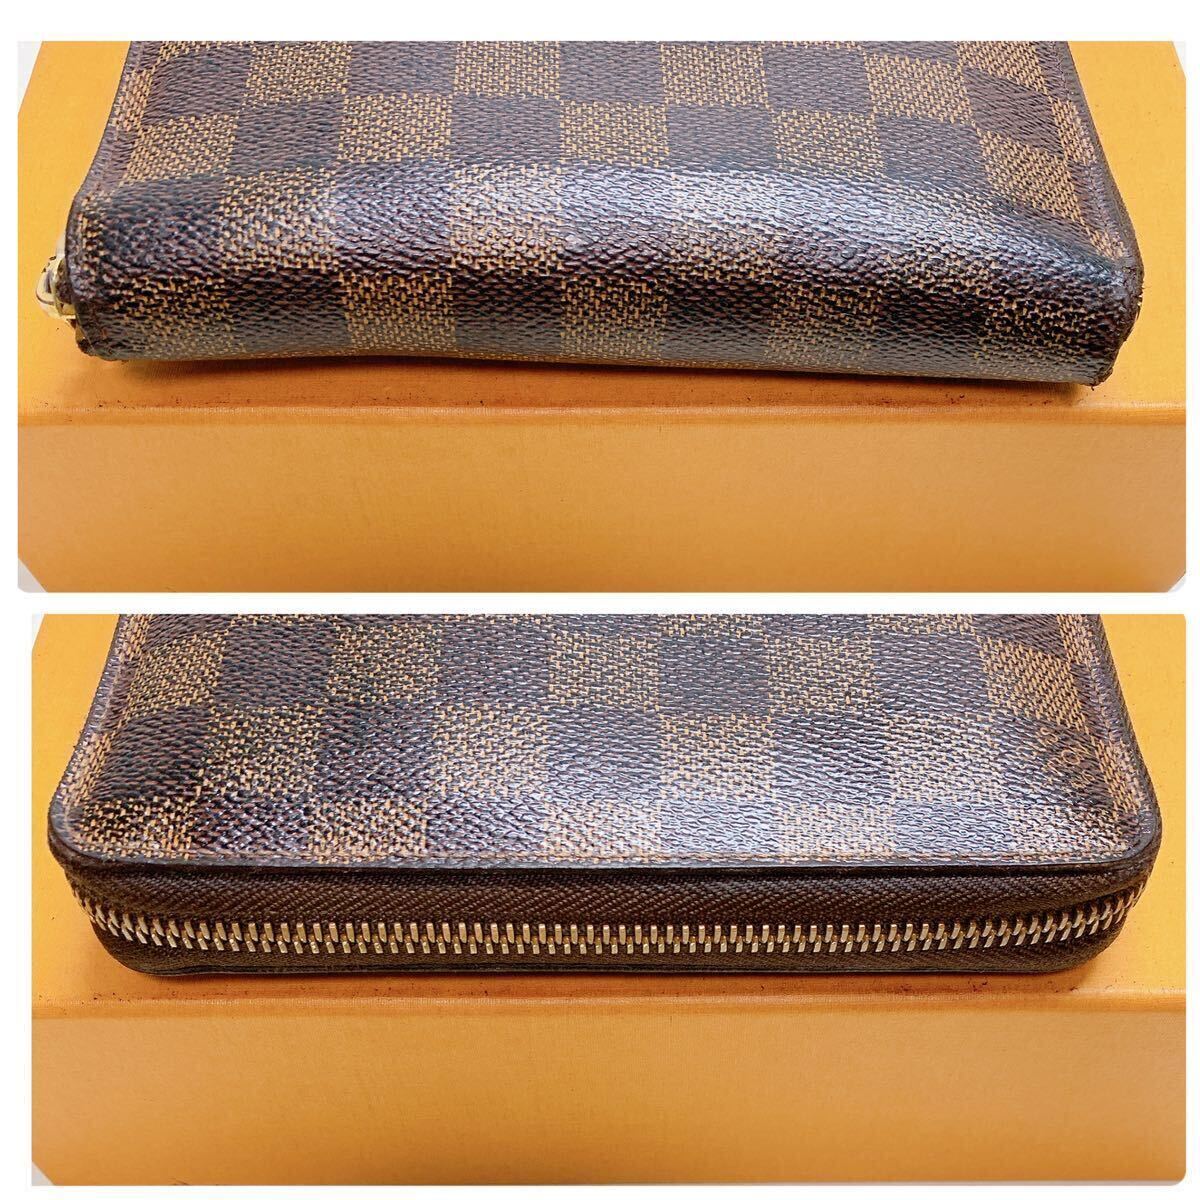 A040【美品】LOUIS VUITTON ルイヴィトン ダミエ 長財布 ジッピー・コンパクトウォレットN60028/MI0133_画像4